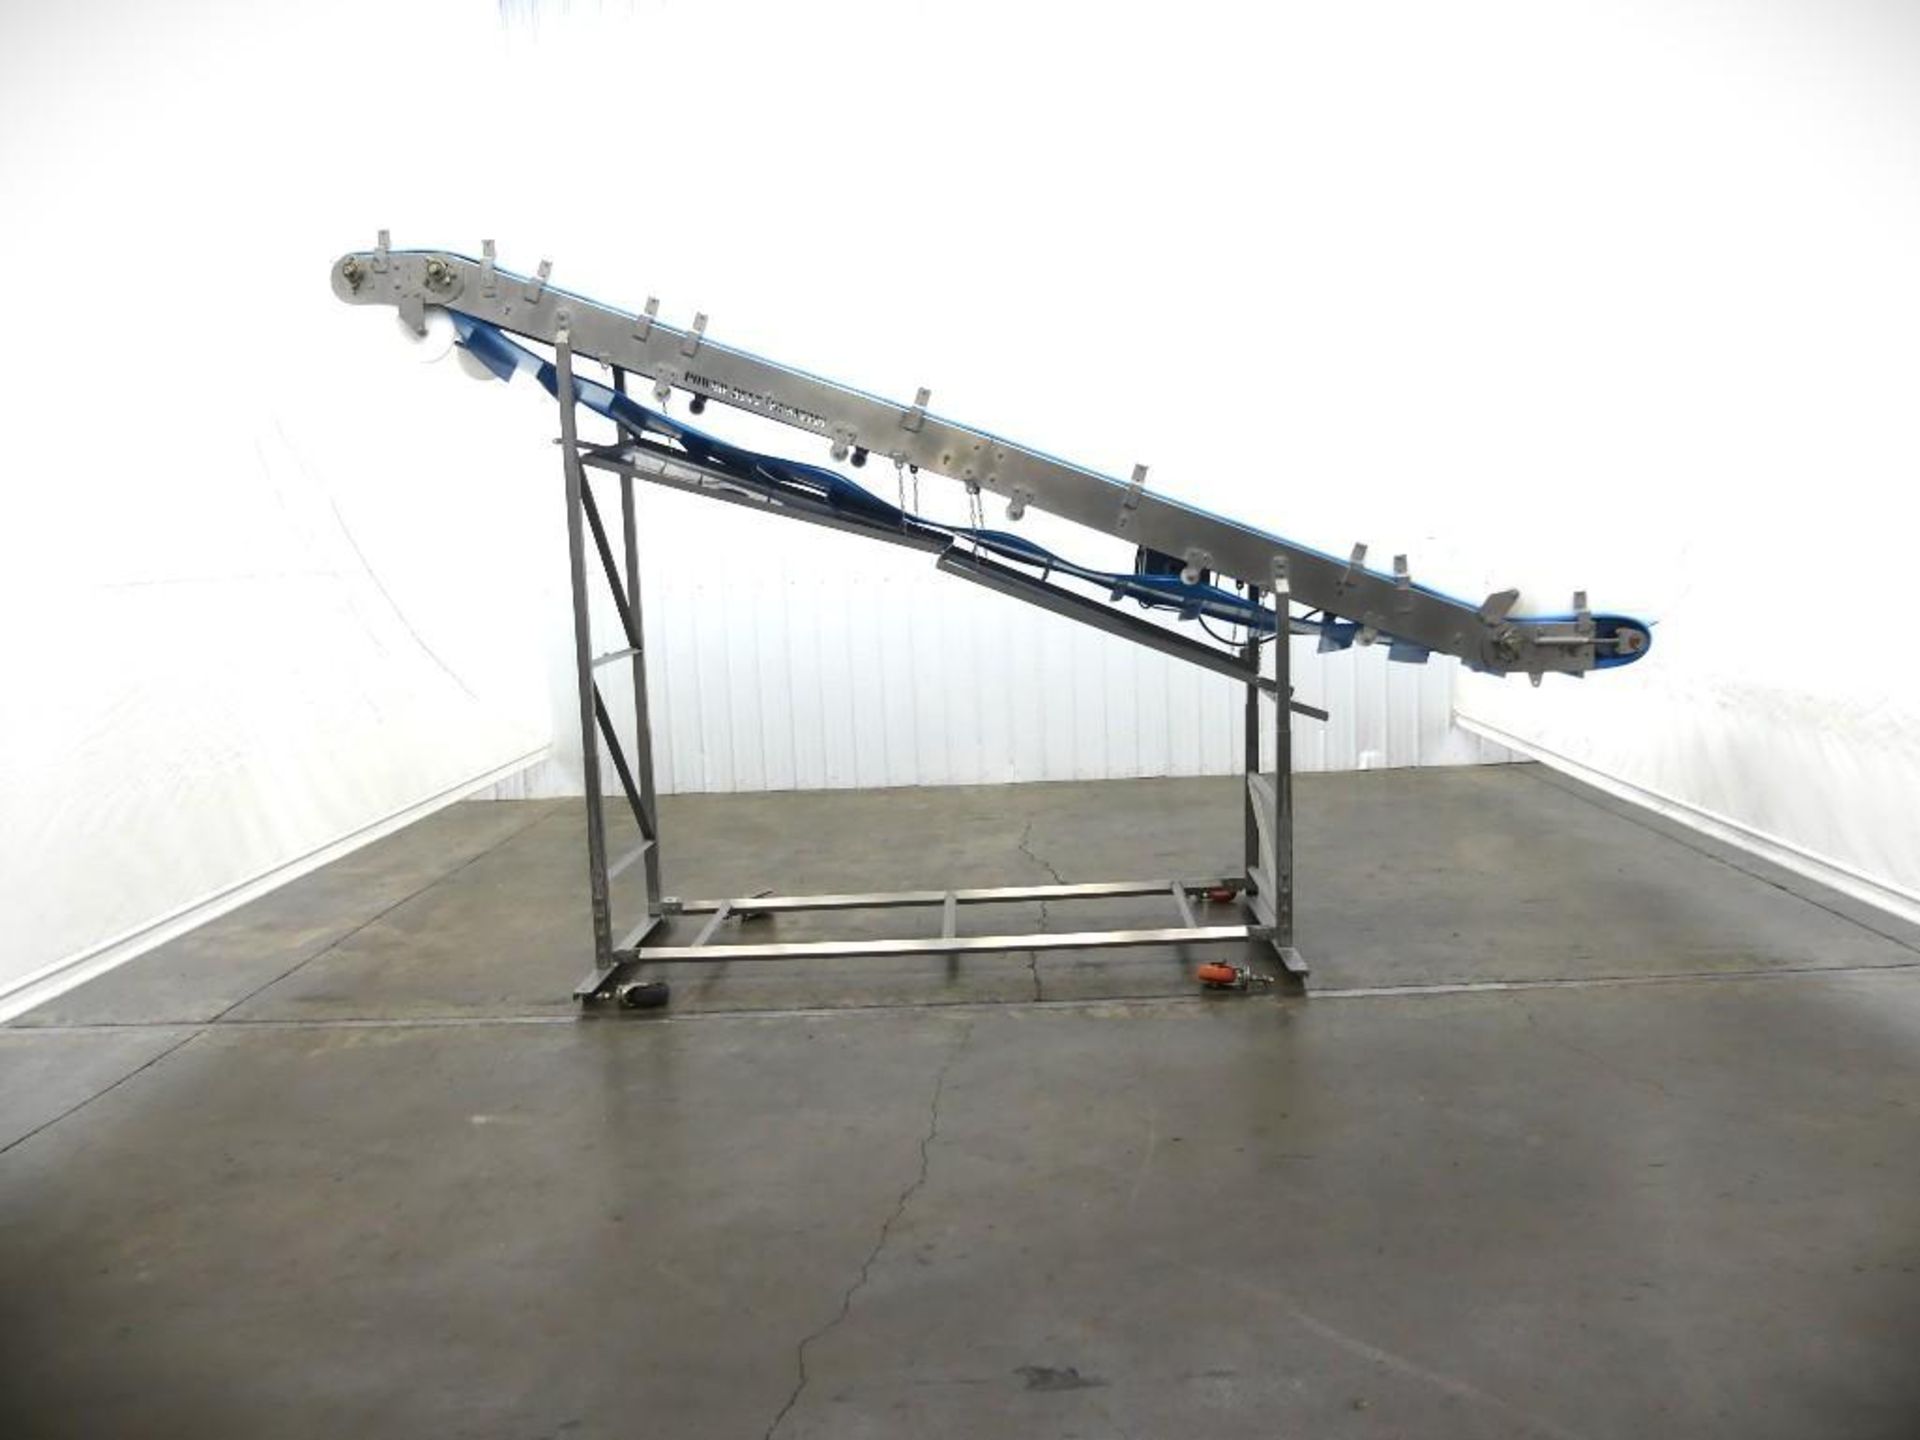 Power Belt Systems 18' L by 28" W Cleated Decline Conveyor